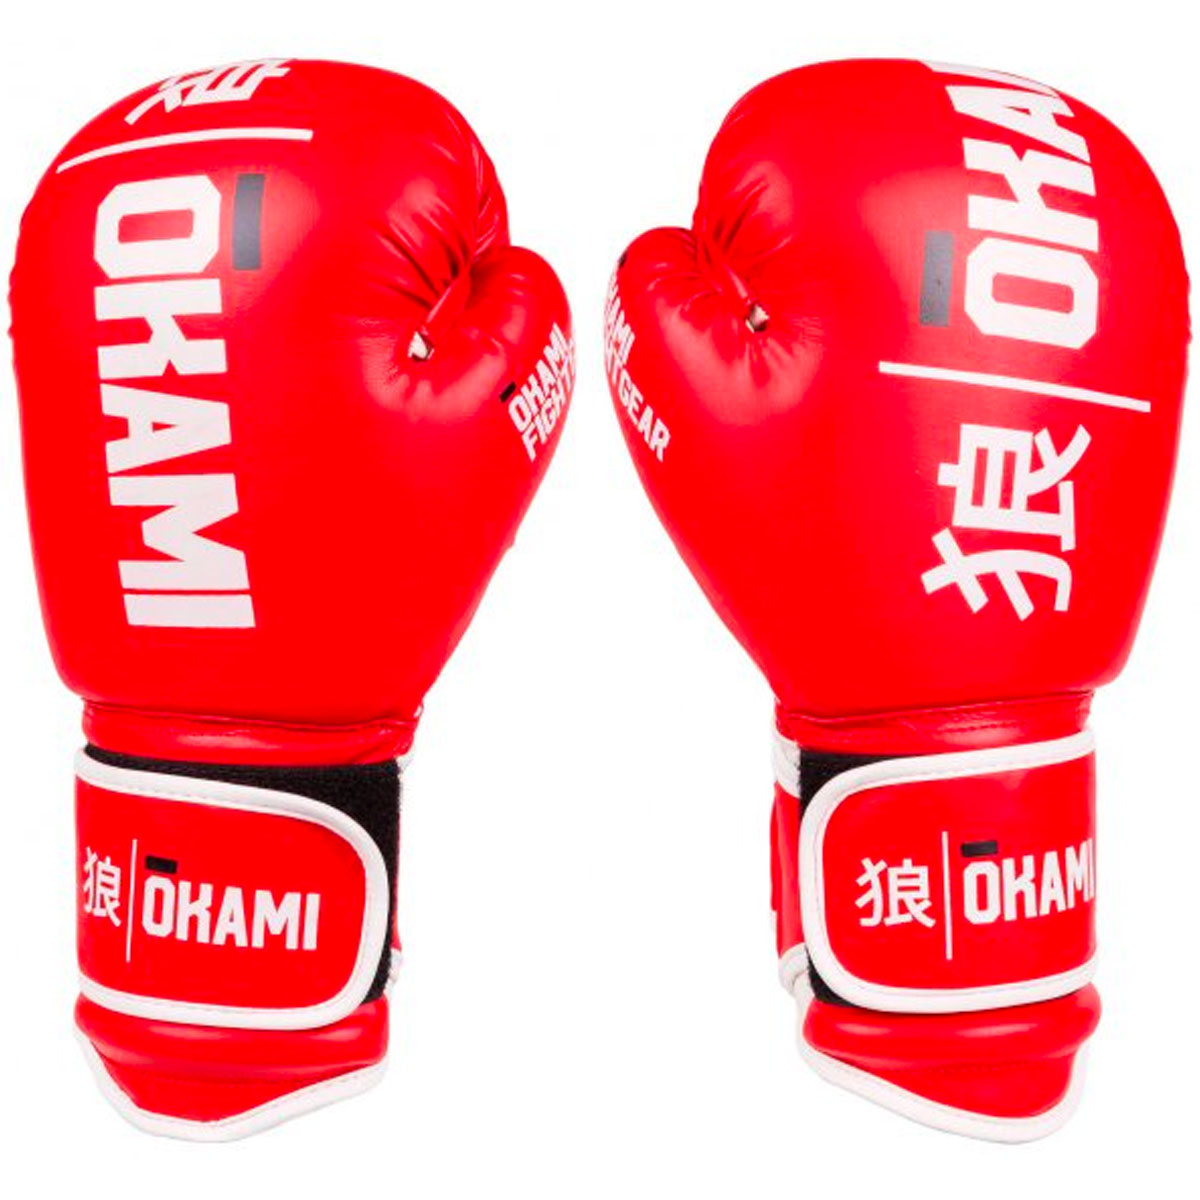 OKAMI Boxing Gloves, Red Rumble, 14 Oz